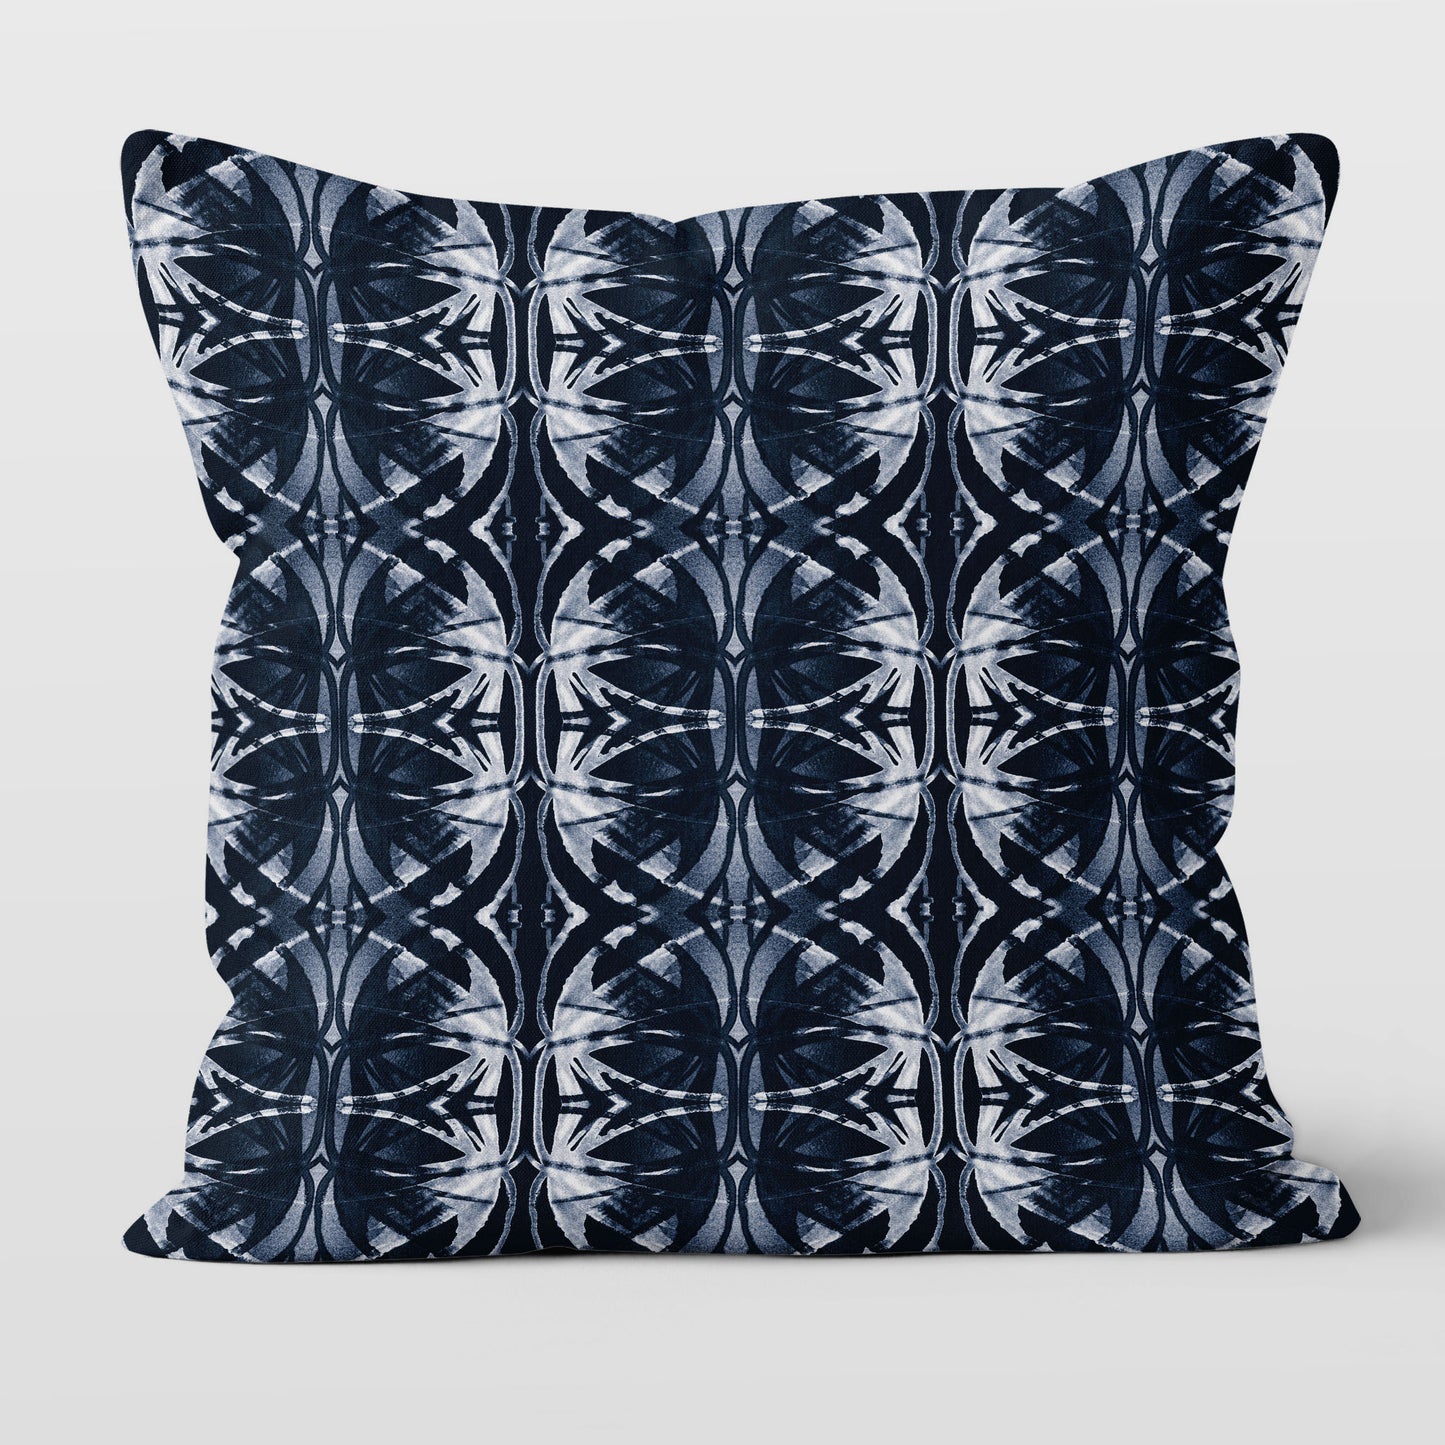 Square throw pillow featuring a dark blue and white abstract pattern